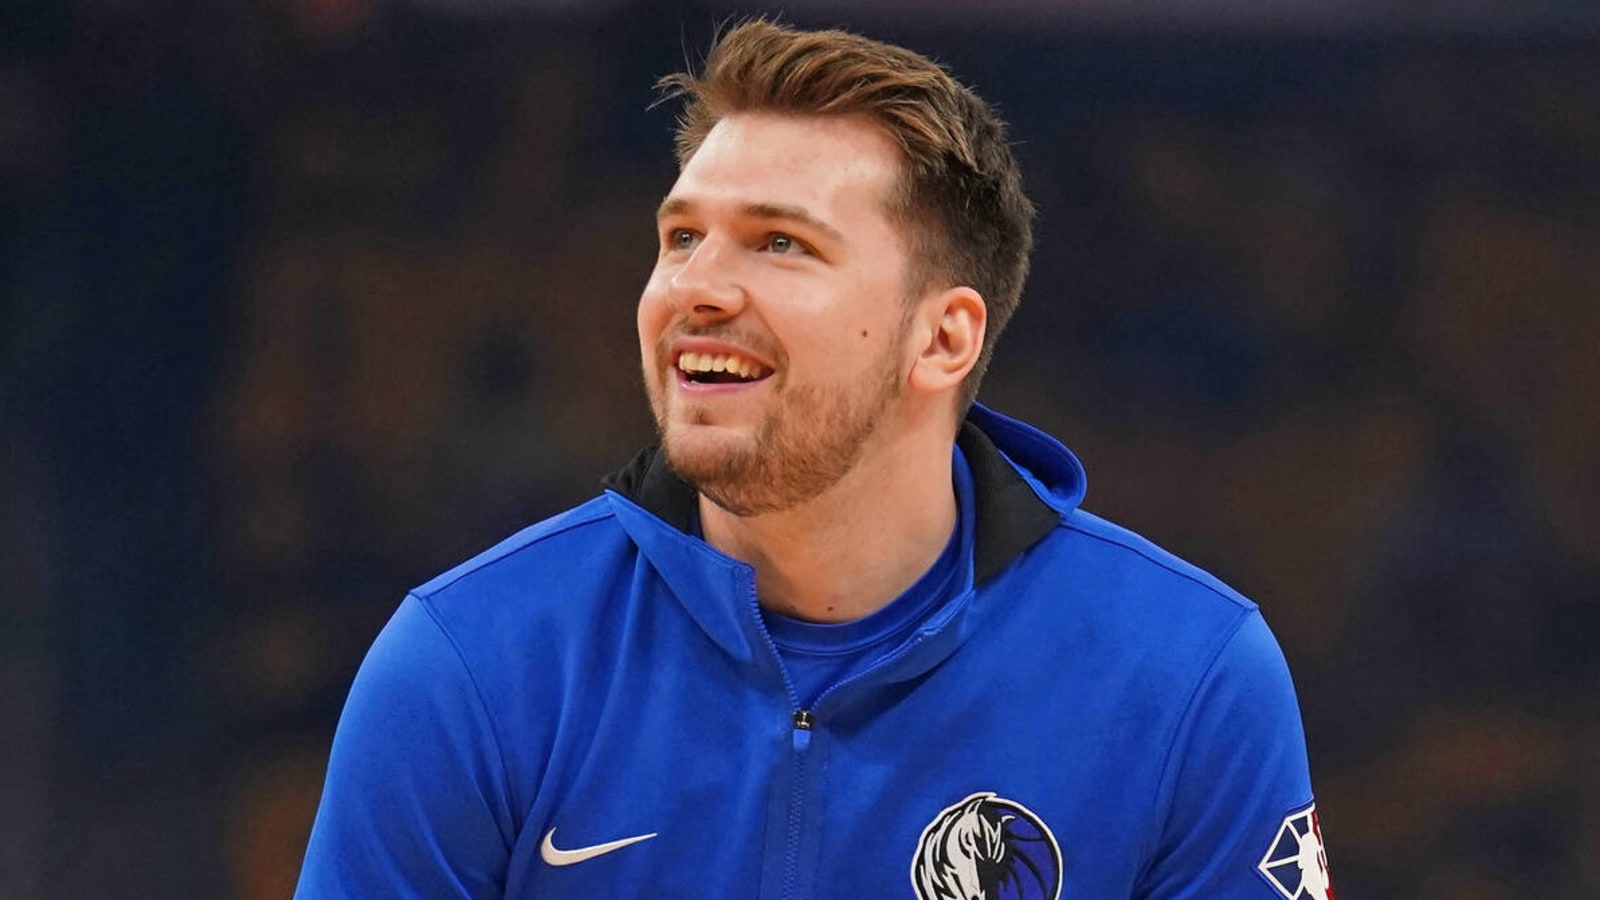 Luka Doncic shares what he would take from Zion Williamson's game